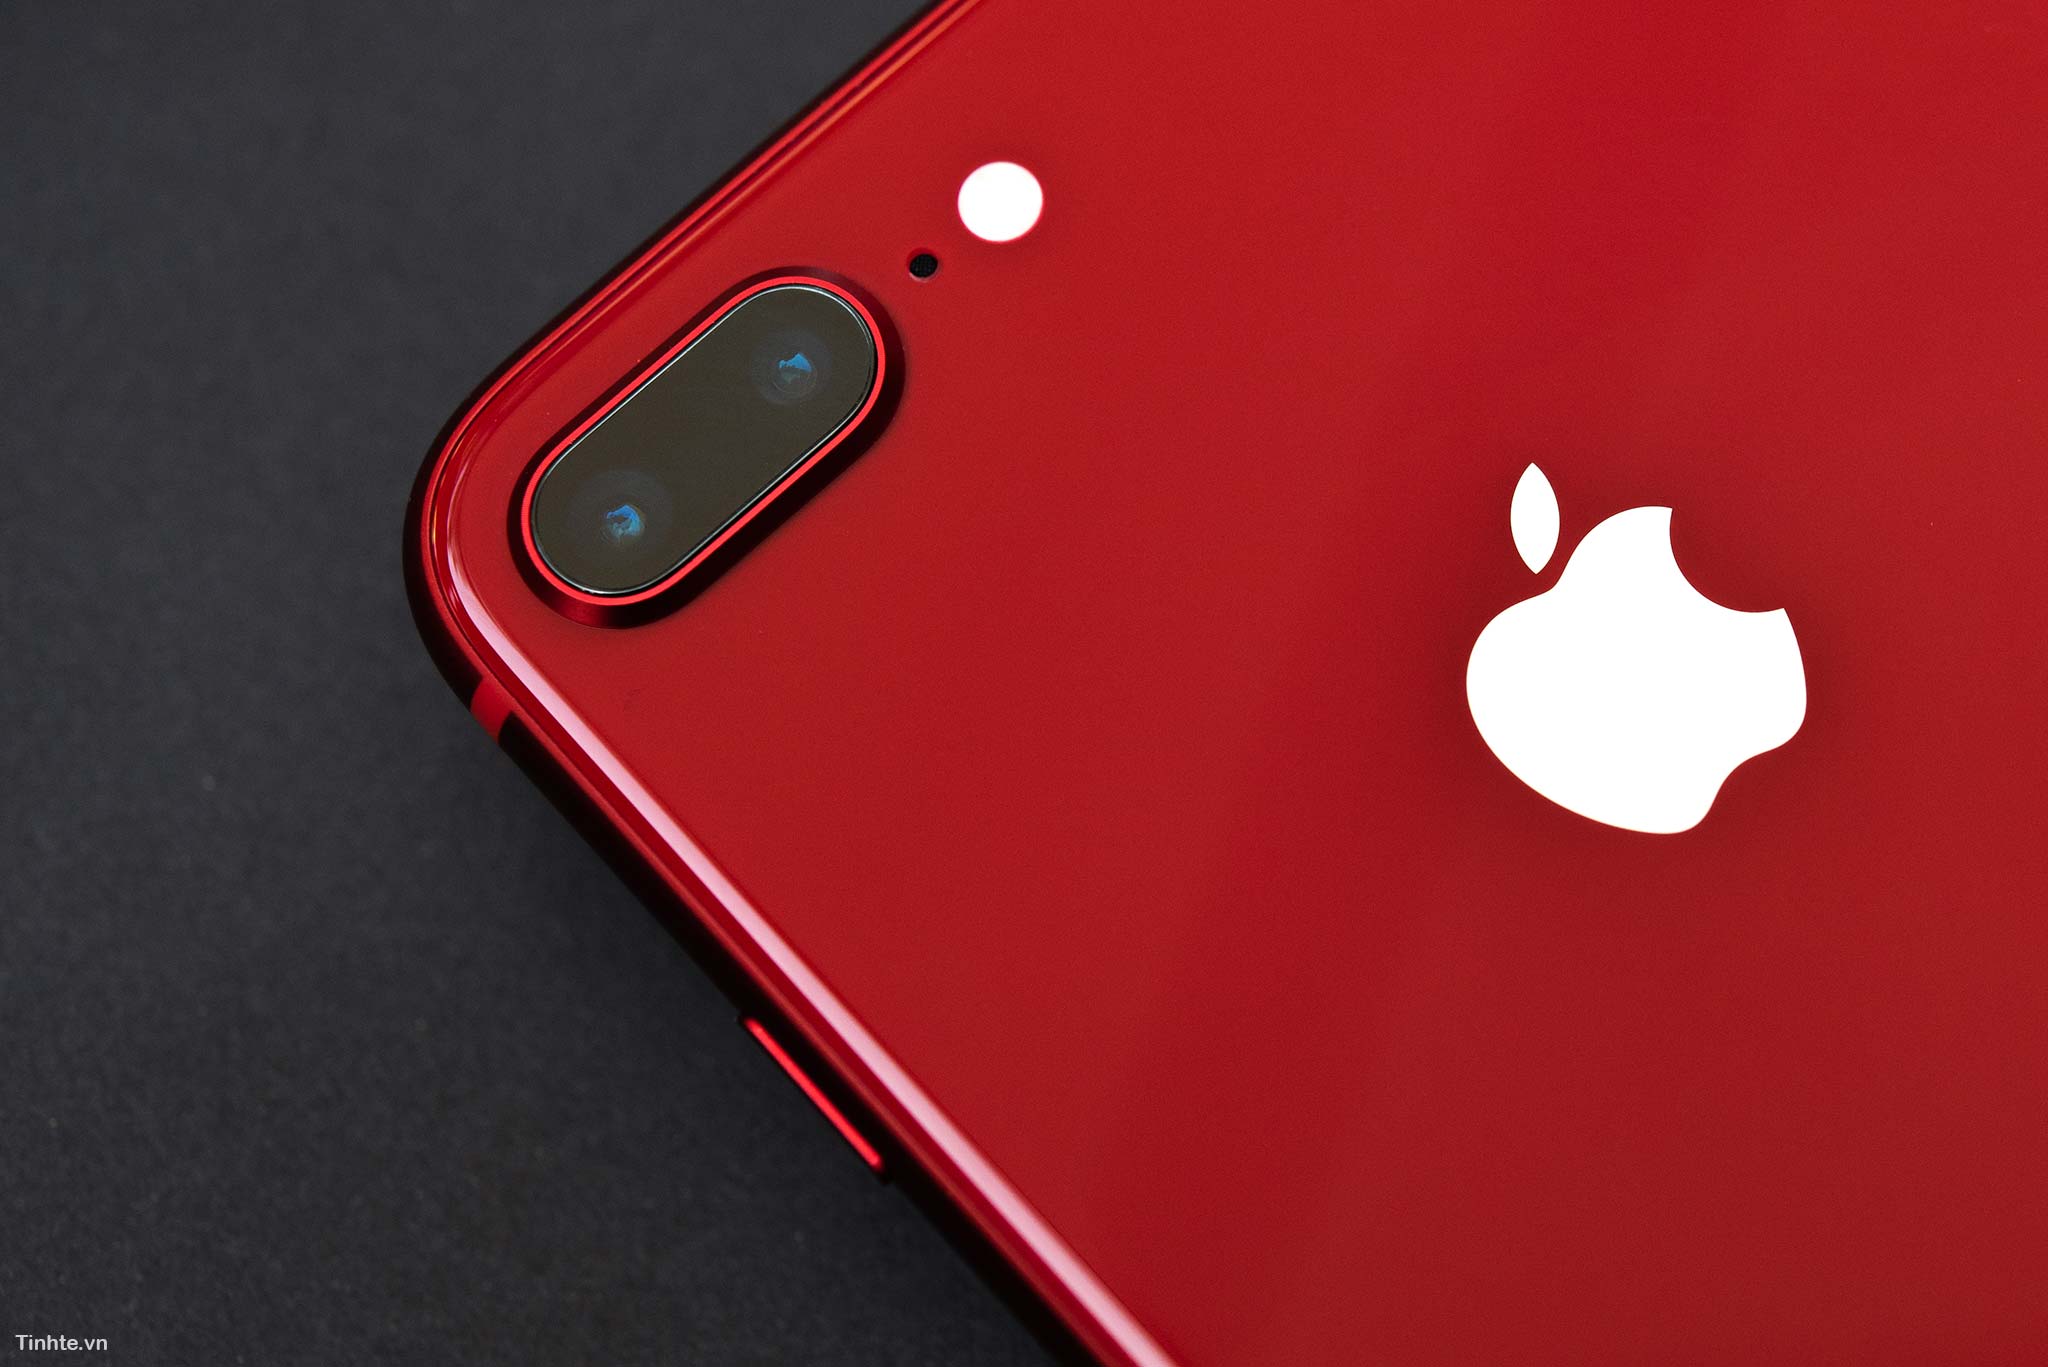 tinhte_tren_tay_apple_iphone_8_product_red_23.jpg